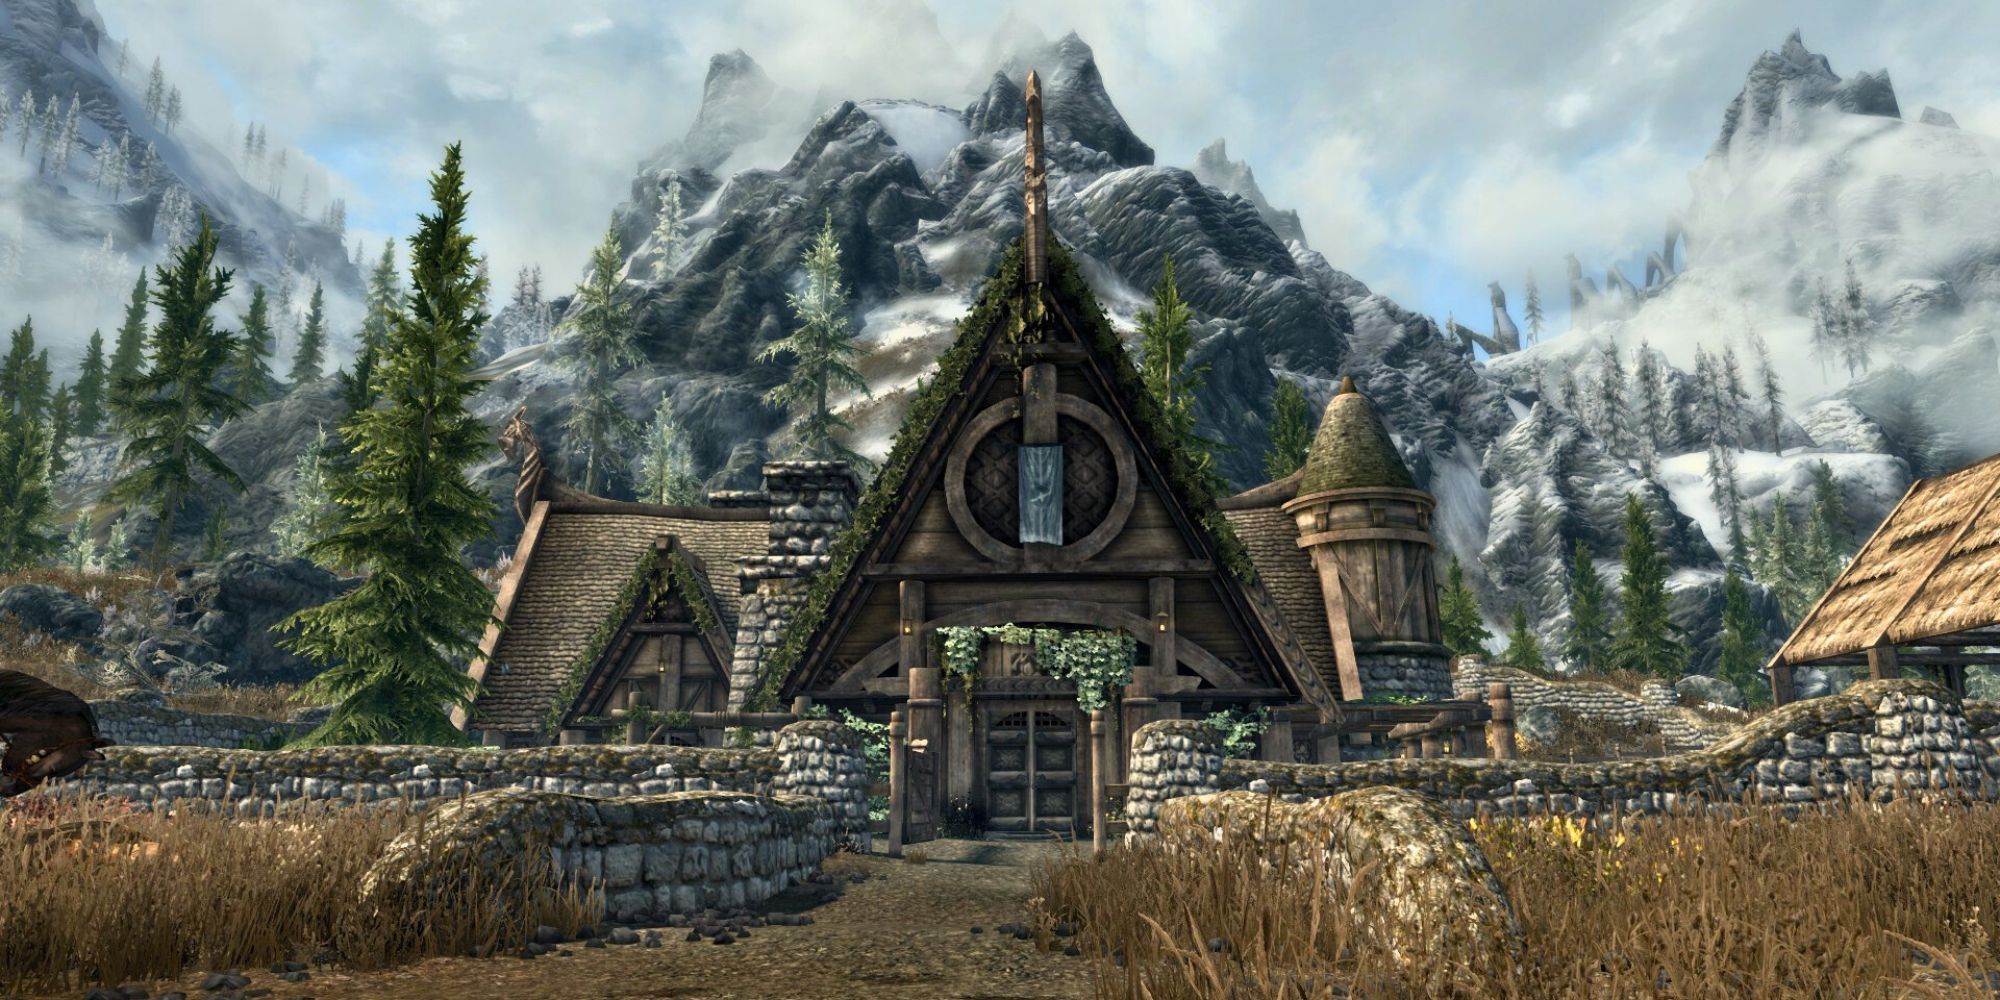 The front of Elysium Estate's exteriors in the daytime